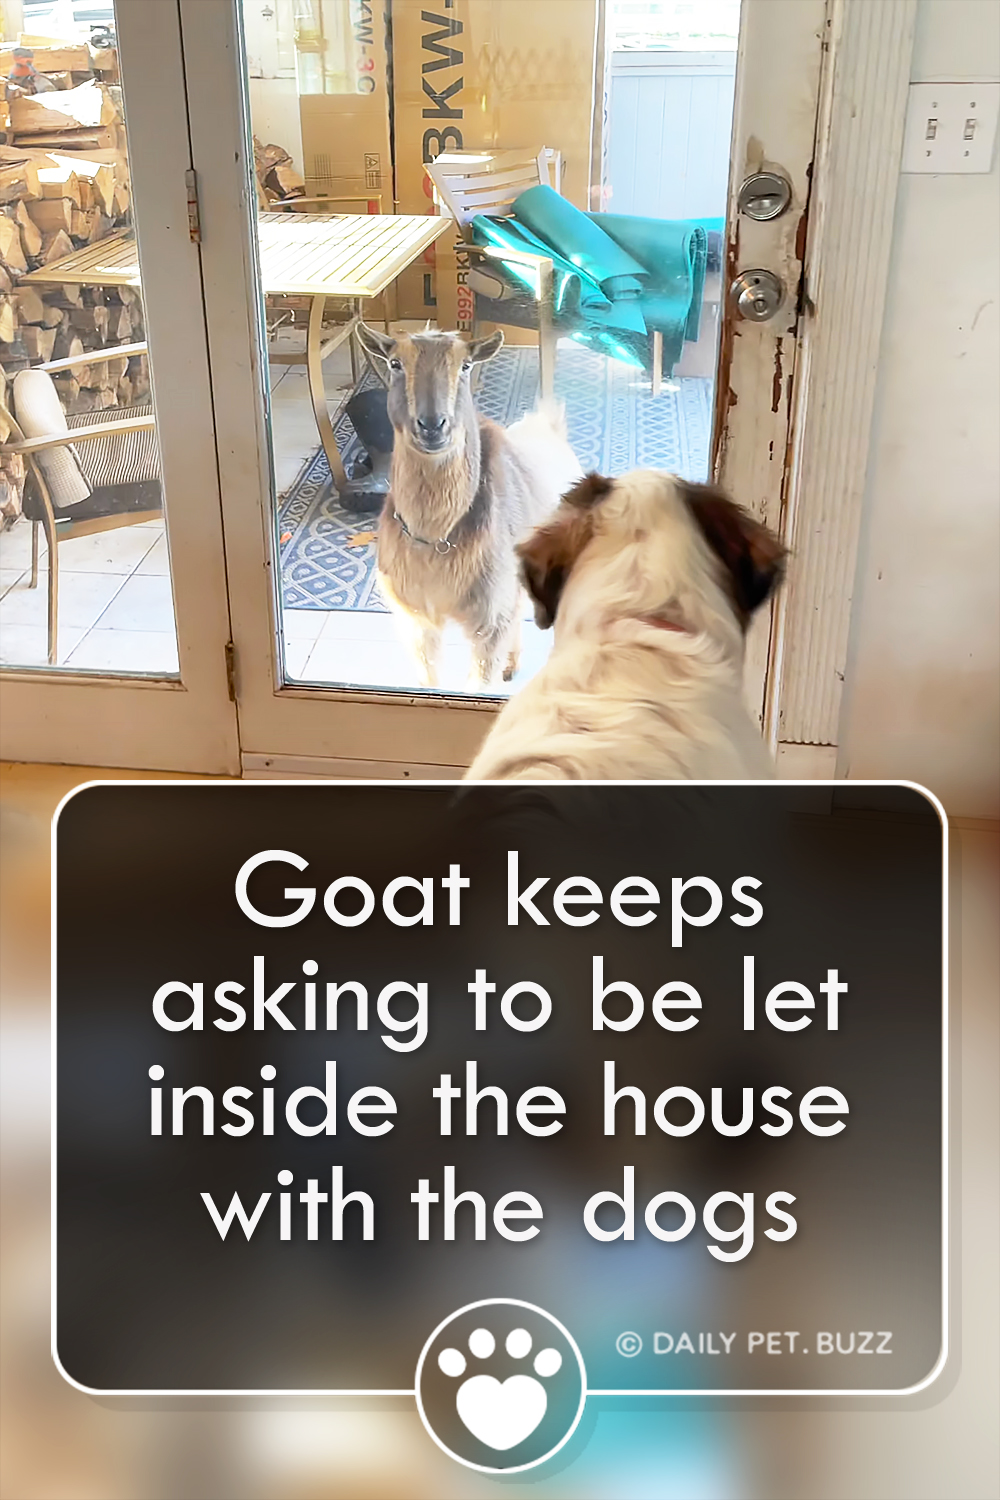 Goat keeps asking to be let inside the house with the dogs